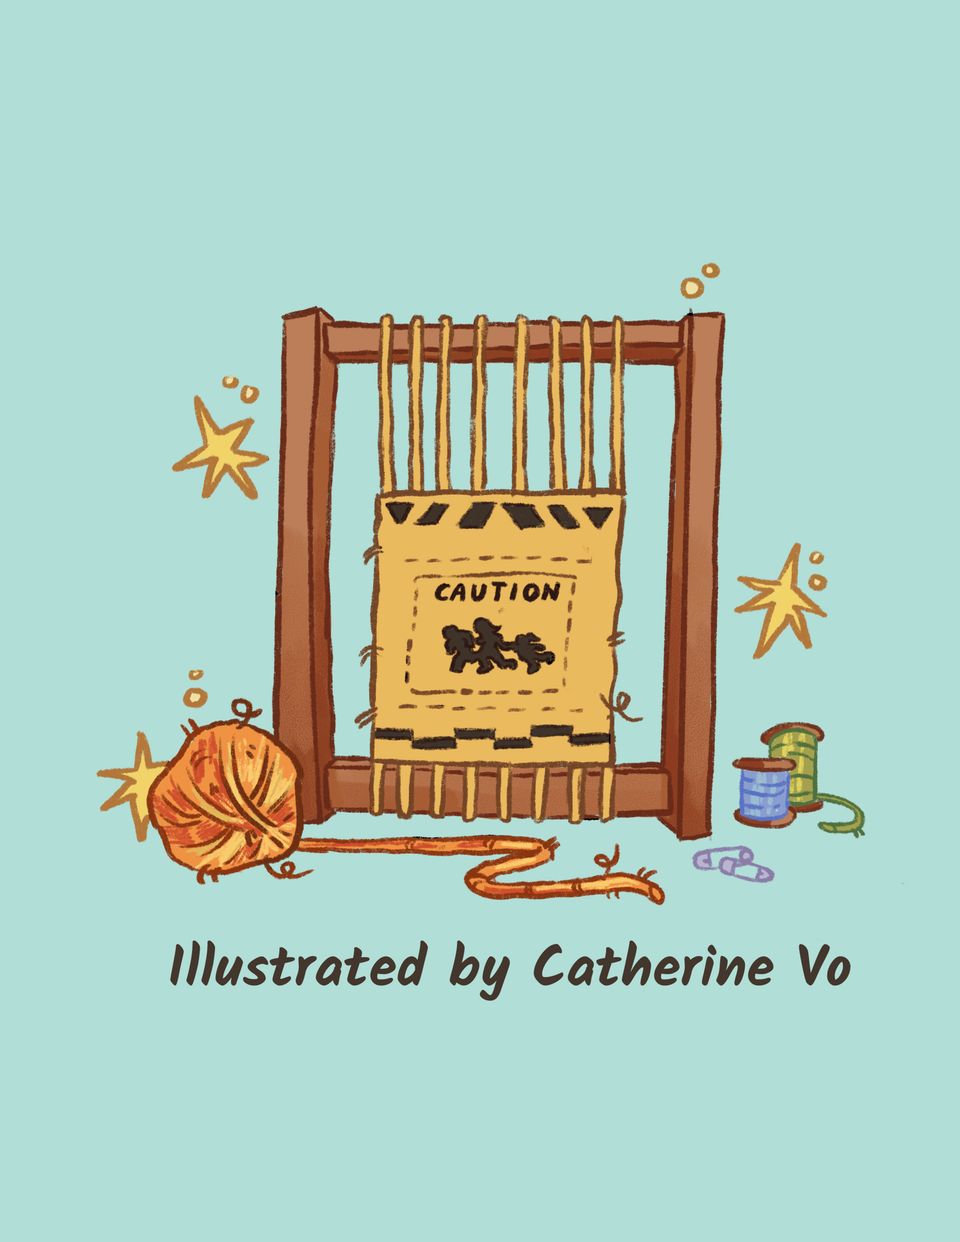 A wooden loom with a woven caution sign, surrounded by other fiber arts materials, sits on a light teal backdrop. Text reads: "Illustrated by Catherine Vo."